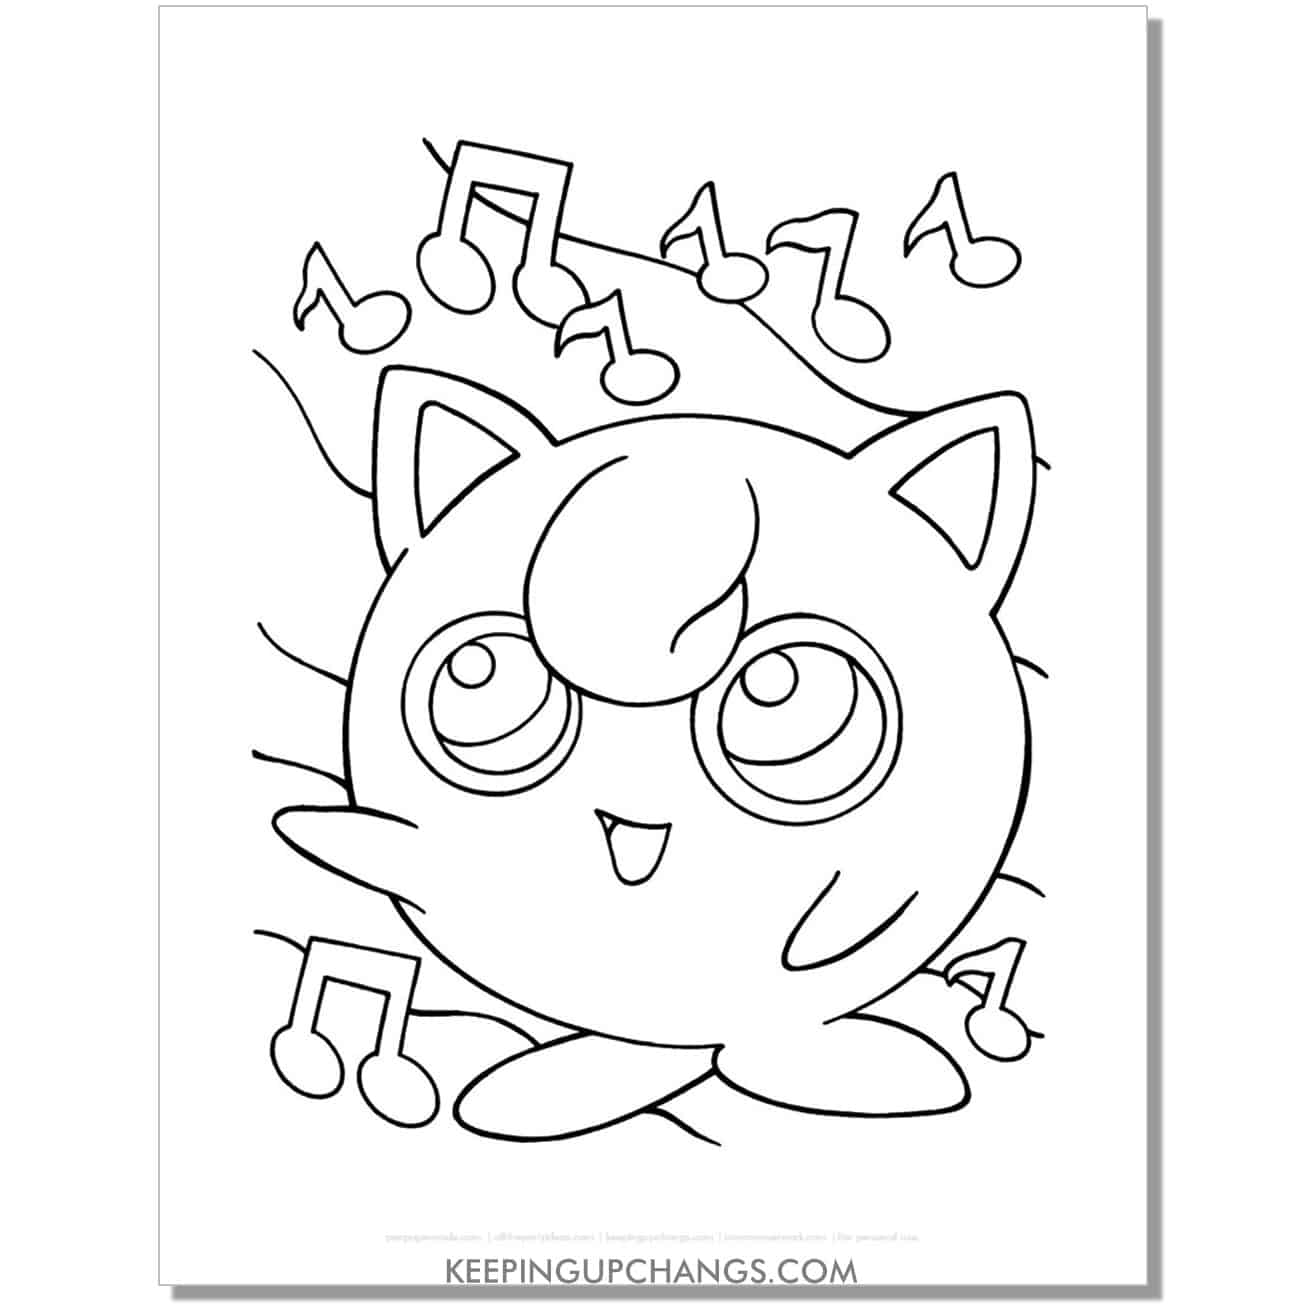 jigglypuff with music notes pokemon coloring page, sheet.